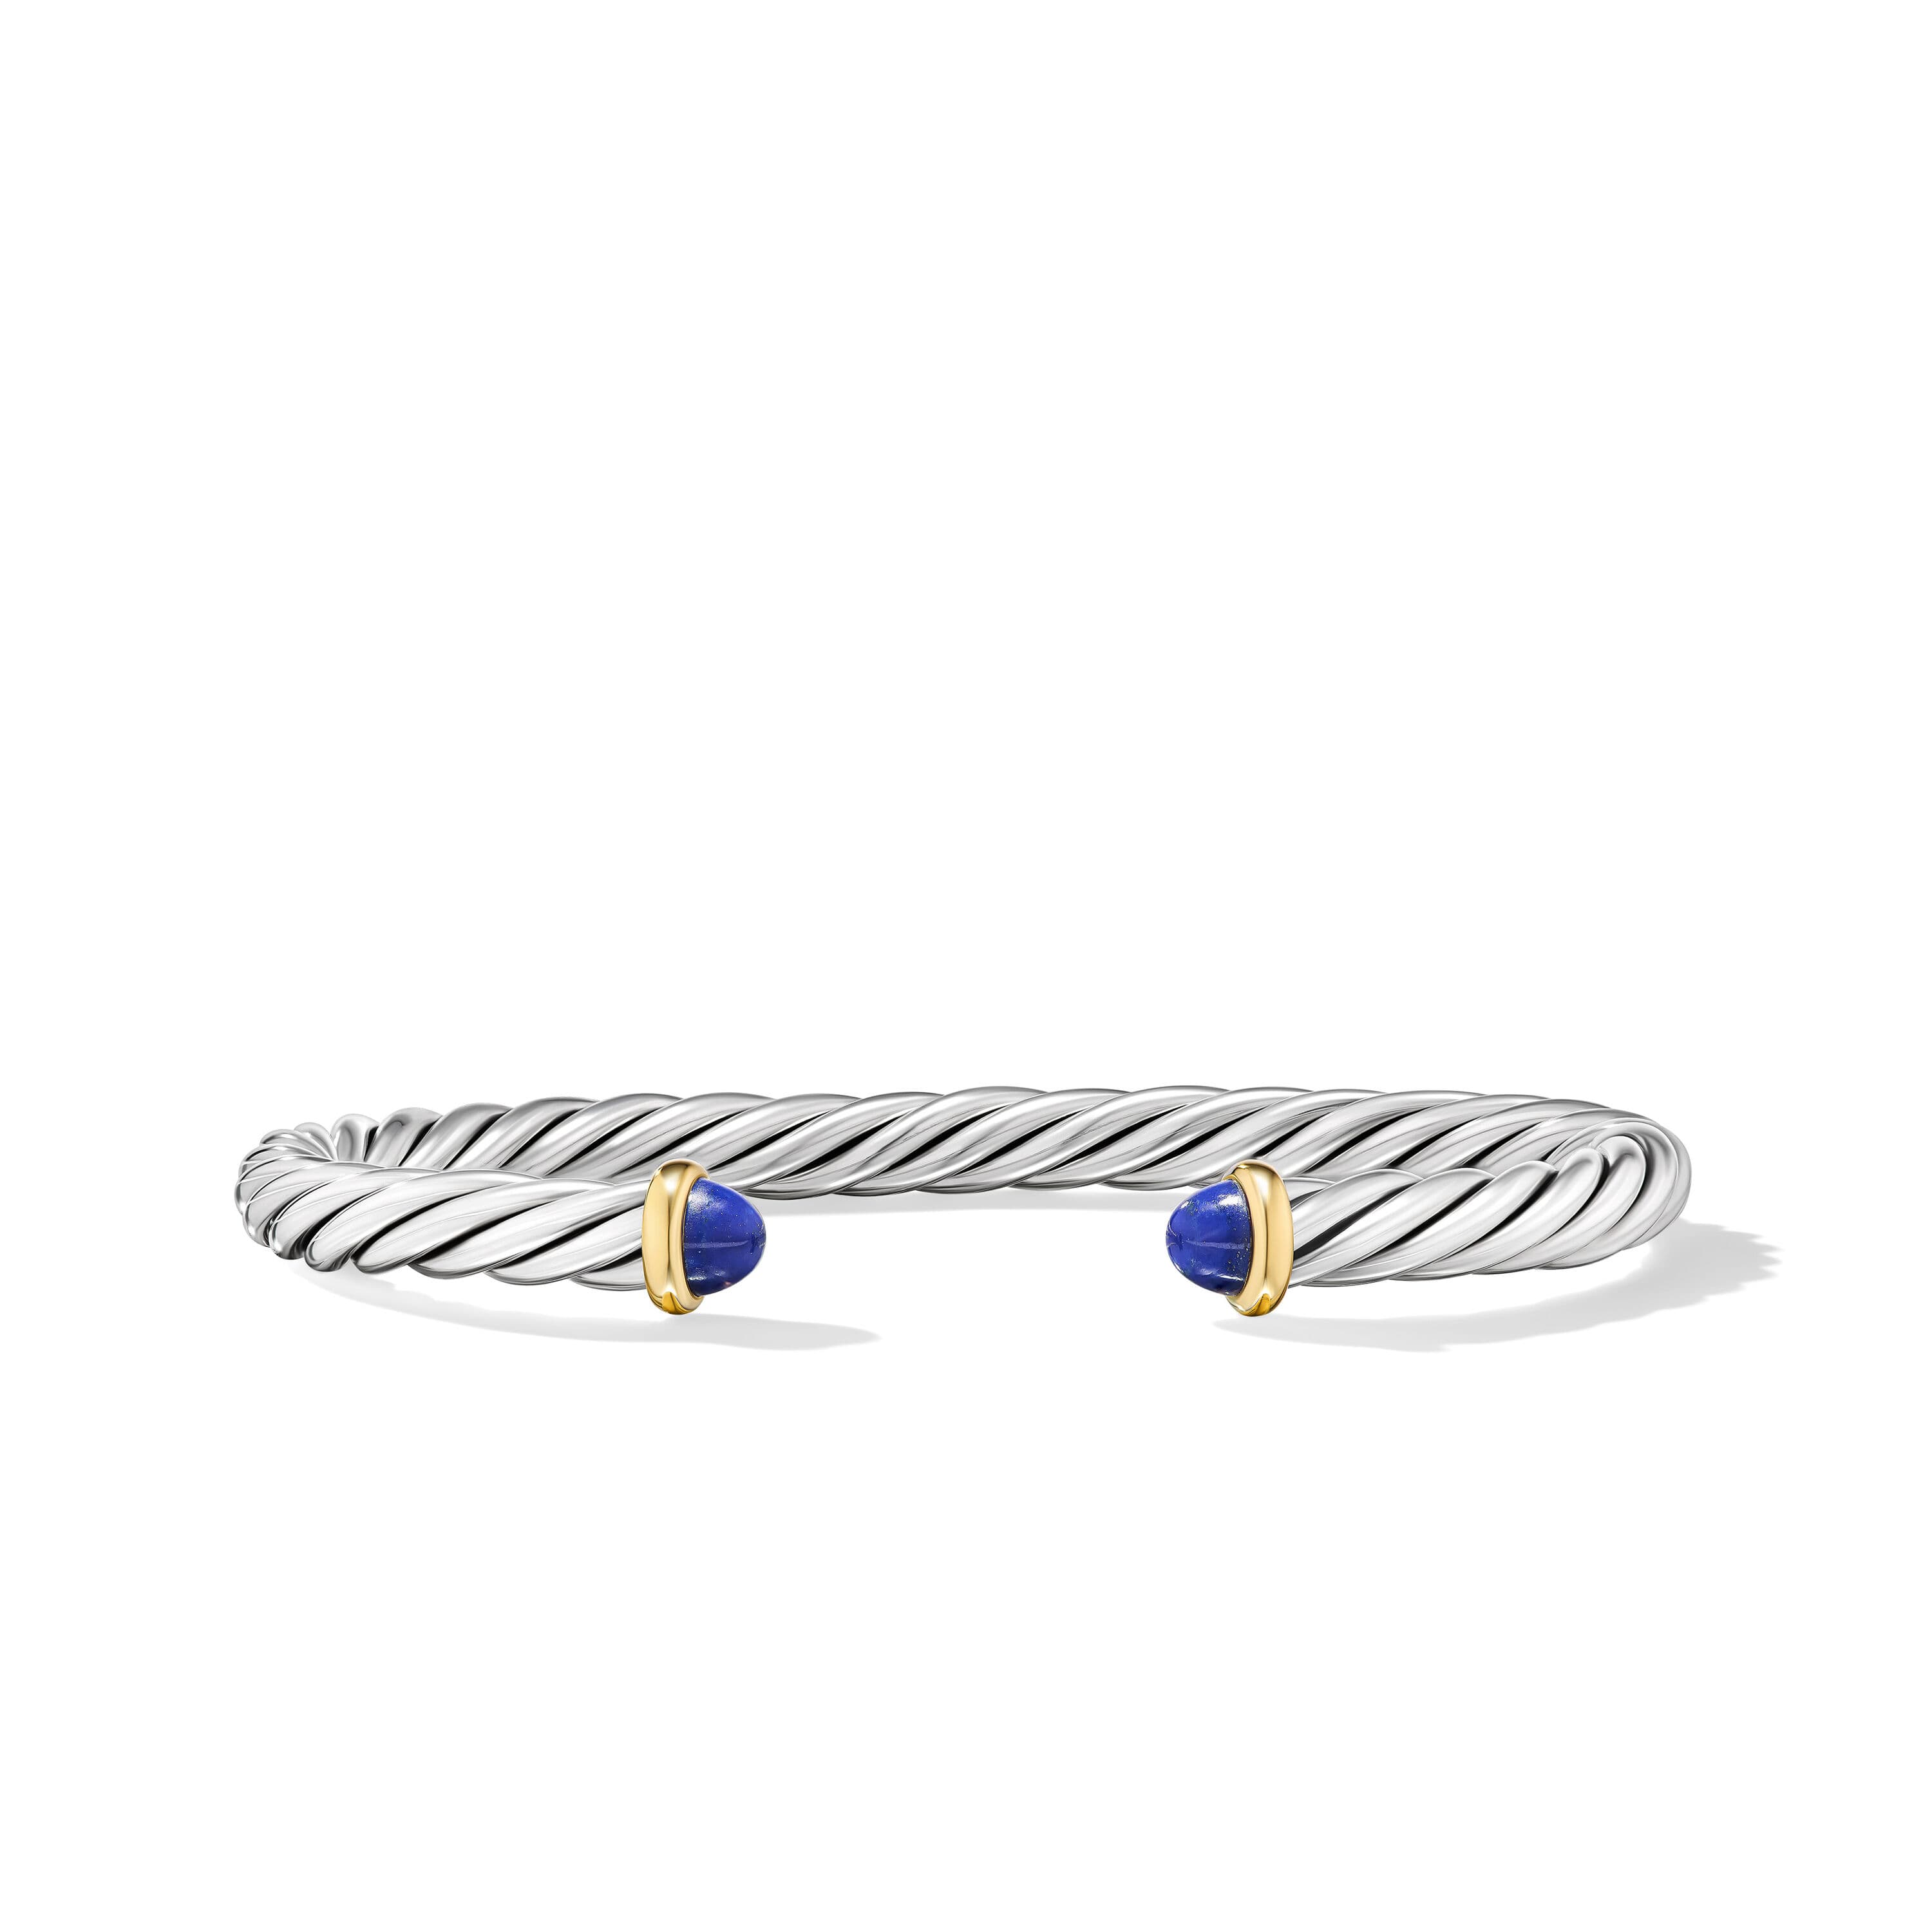 David Yurman 6mm Cable Cuff Bracelet in Sterling Silver with 14K Yellow Gold and Lapis, Small